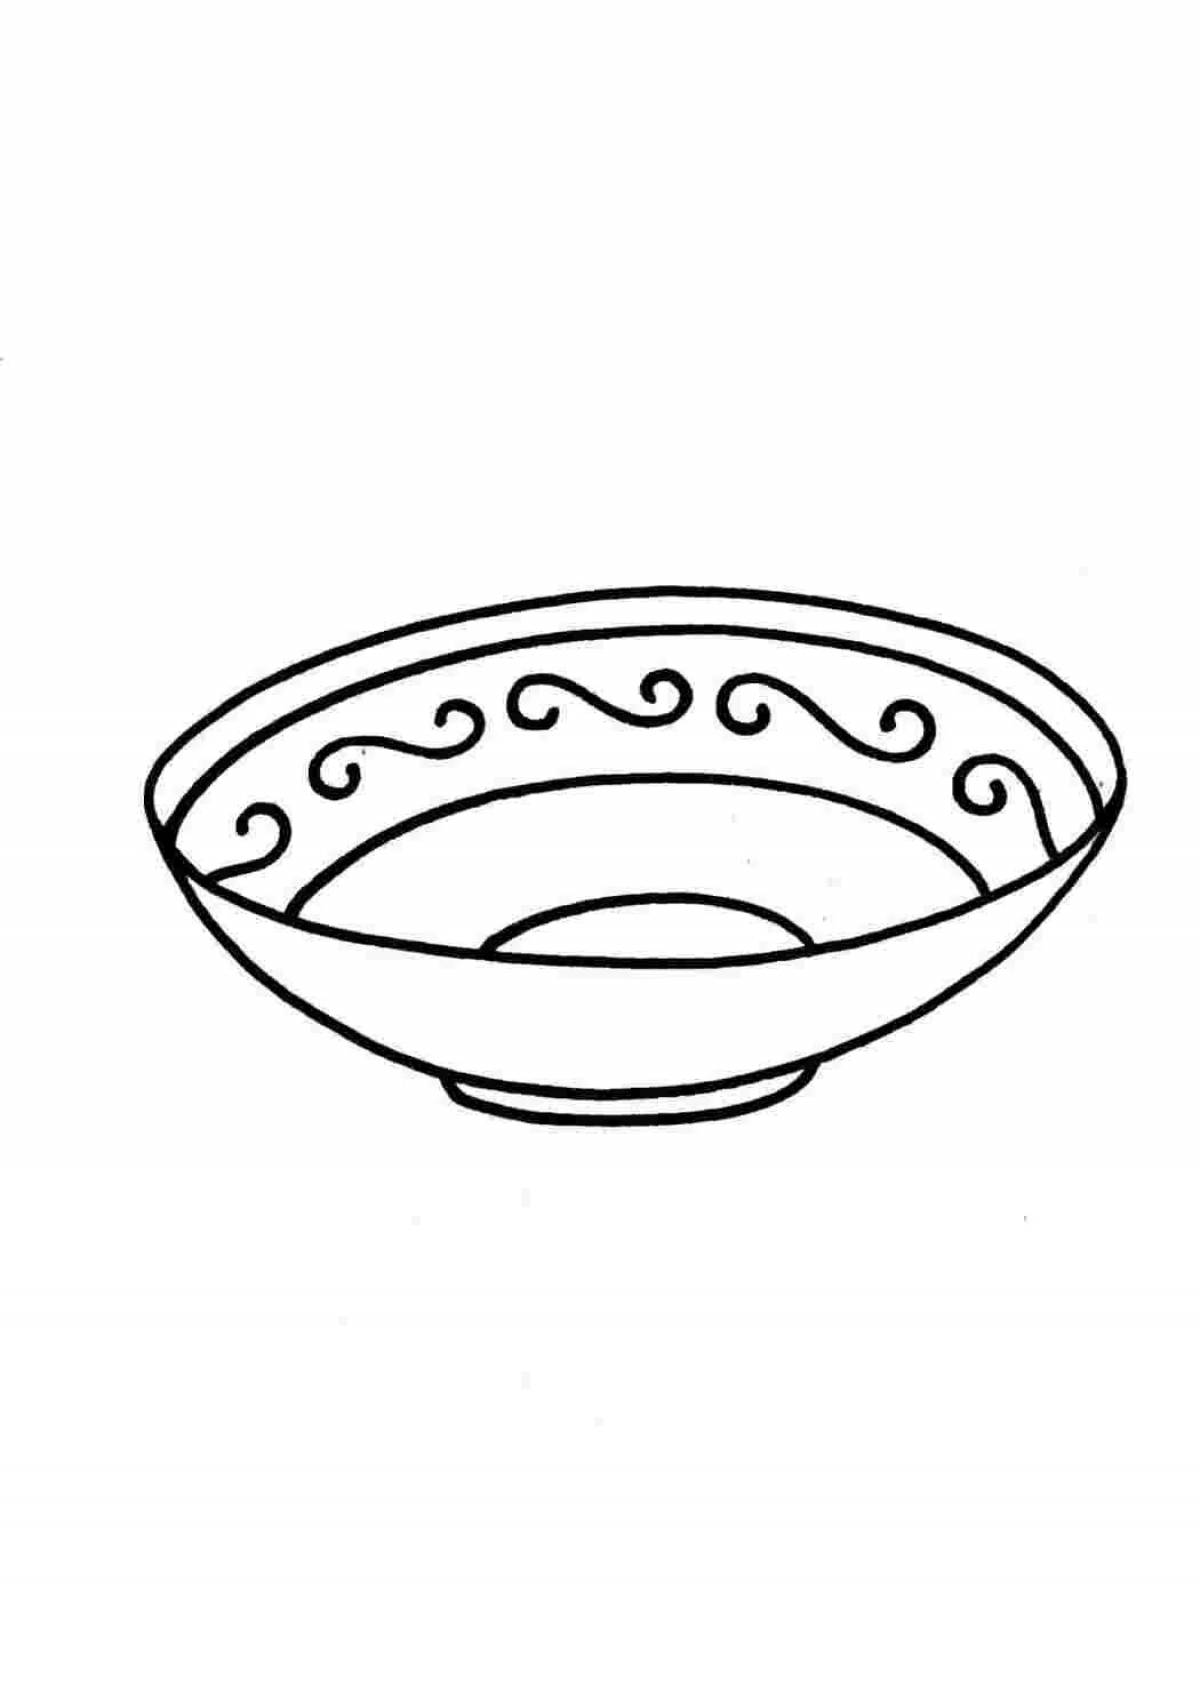 Drawing of a calm plate